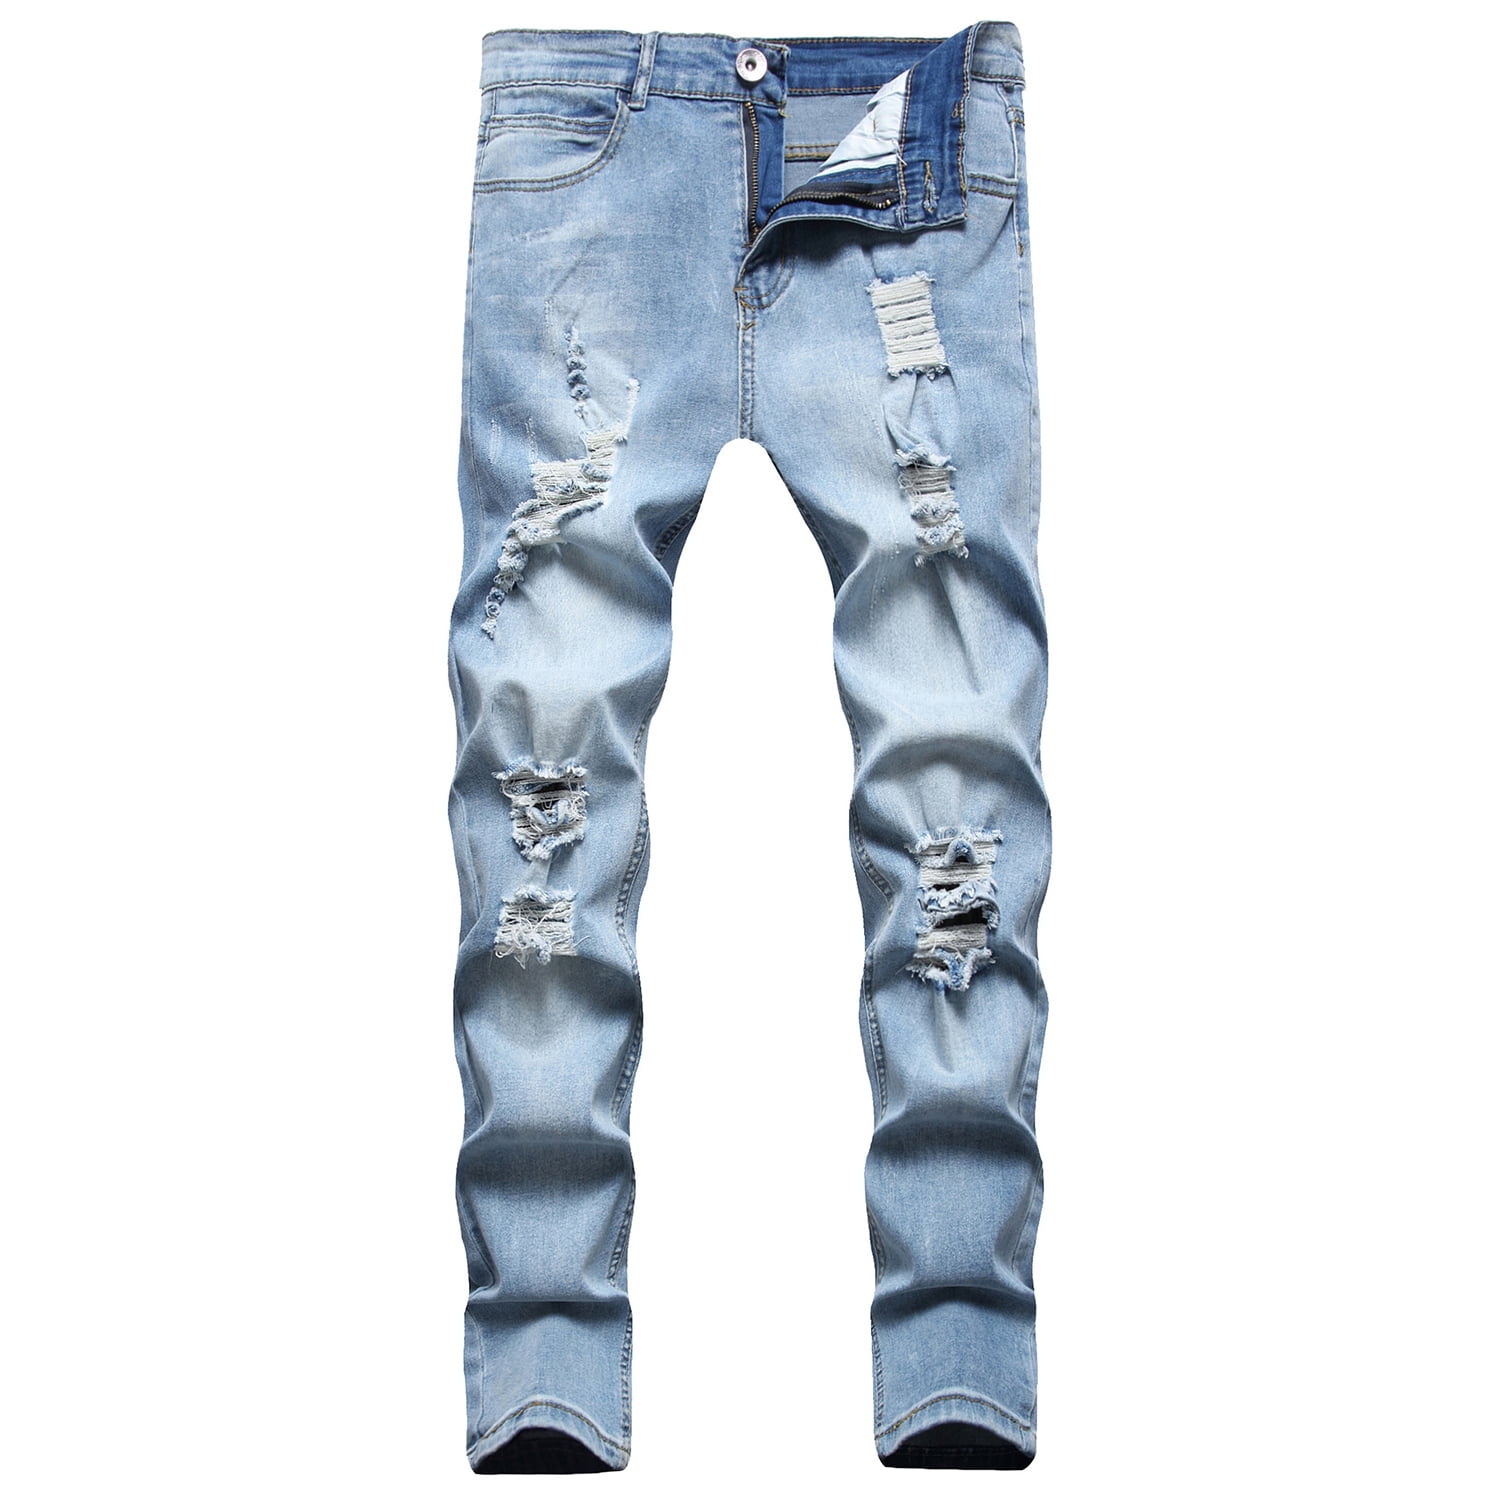 Lu's Chic Men's Distressed Jeans Slim Fit Pants Mid Rise Trousers